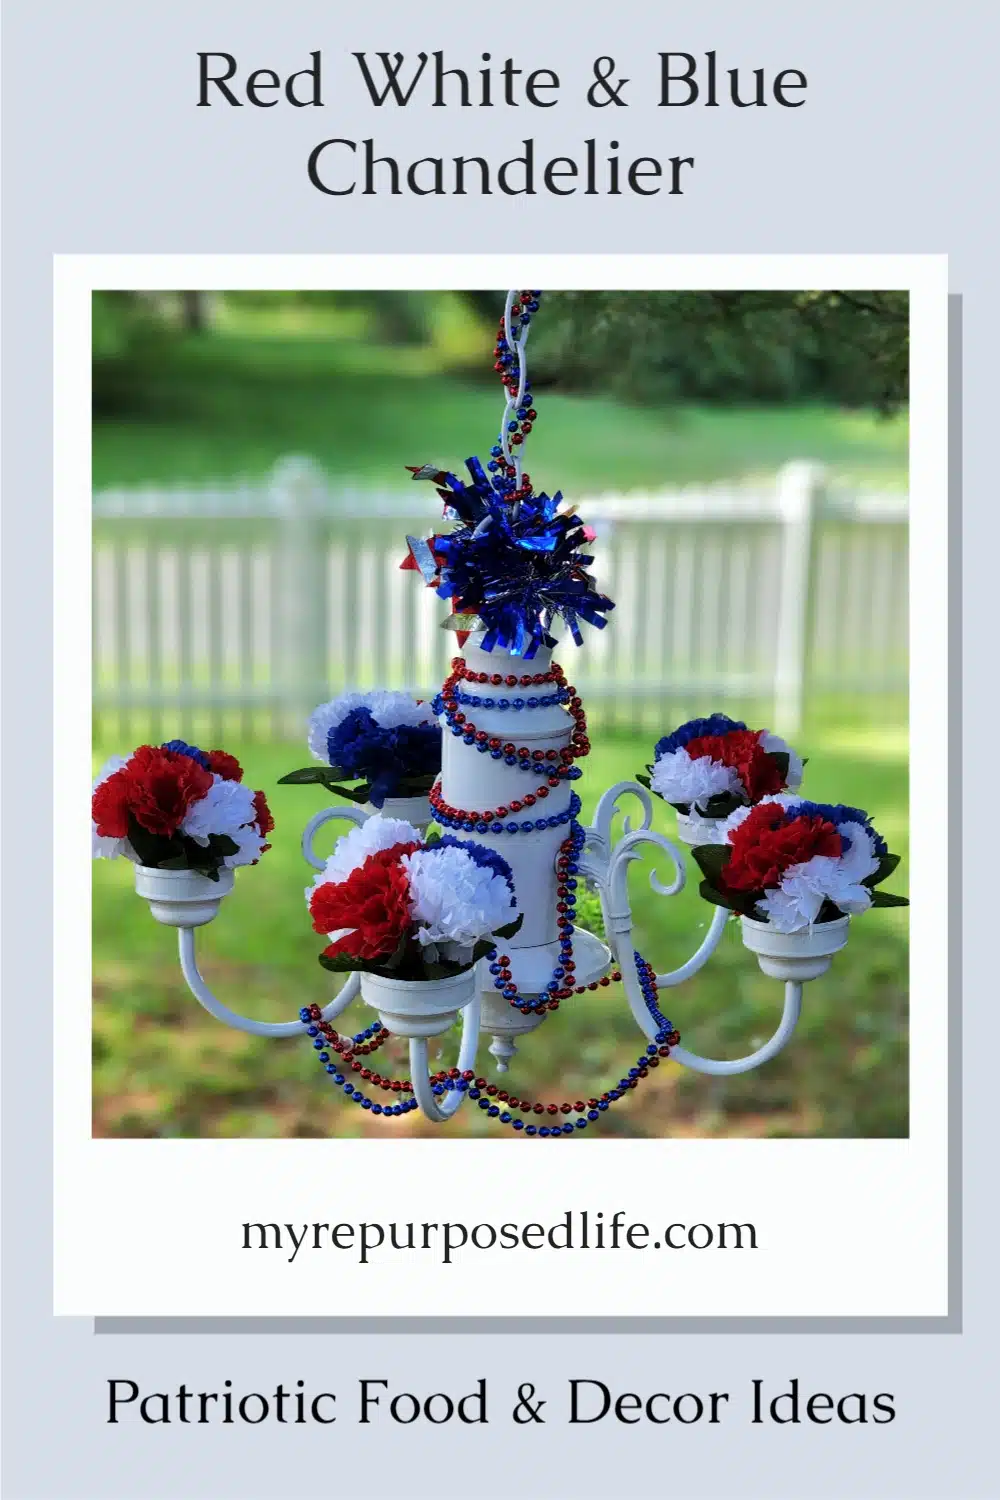 A red white and blue chandelier project highlights a collection of patriotic decor. These DIY projects are a fun addition to your party! #MyRepurposedLife #upcycled #chandelier #redwhiteblue #patriotic #usa via @repurposedlife